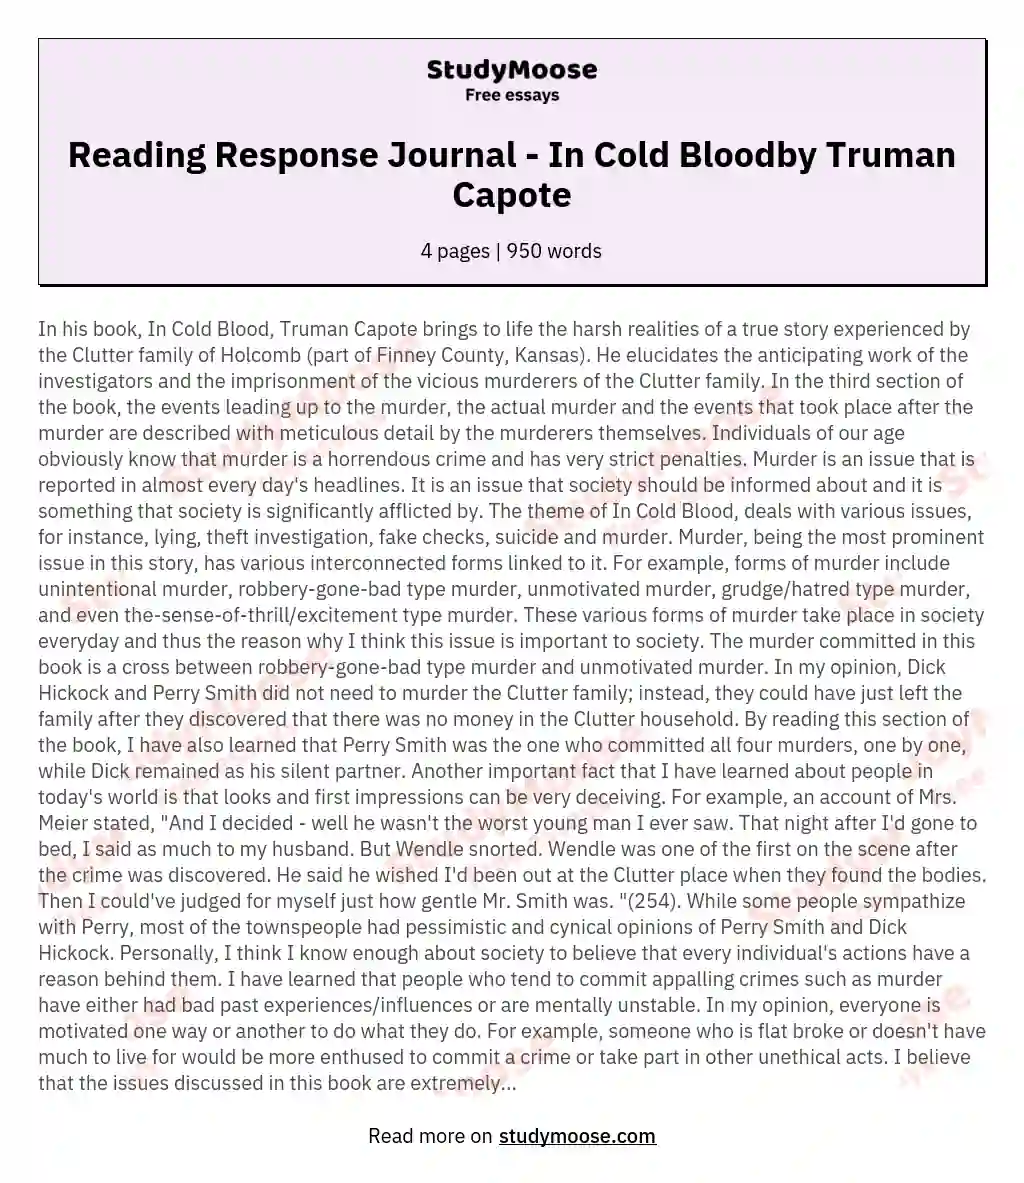 Reading Response Journal - In Cold Bloodby Truman Capote